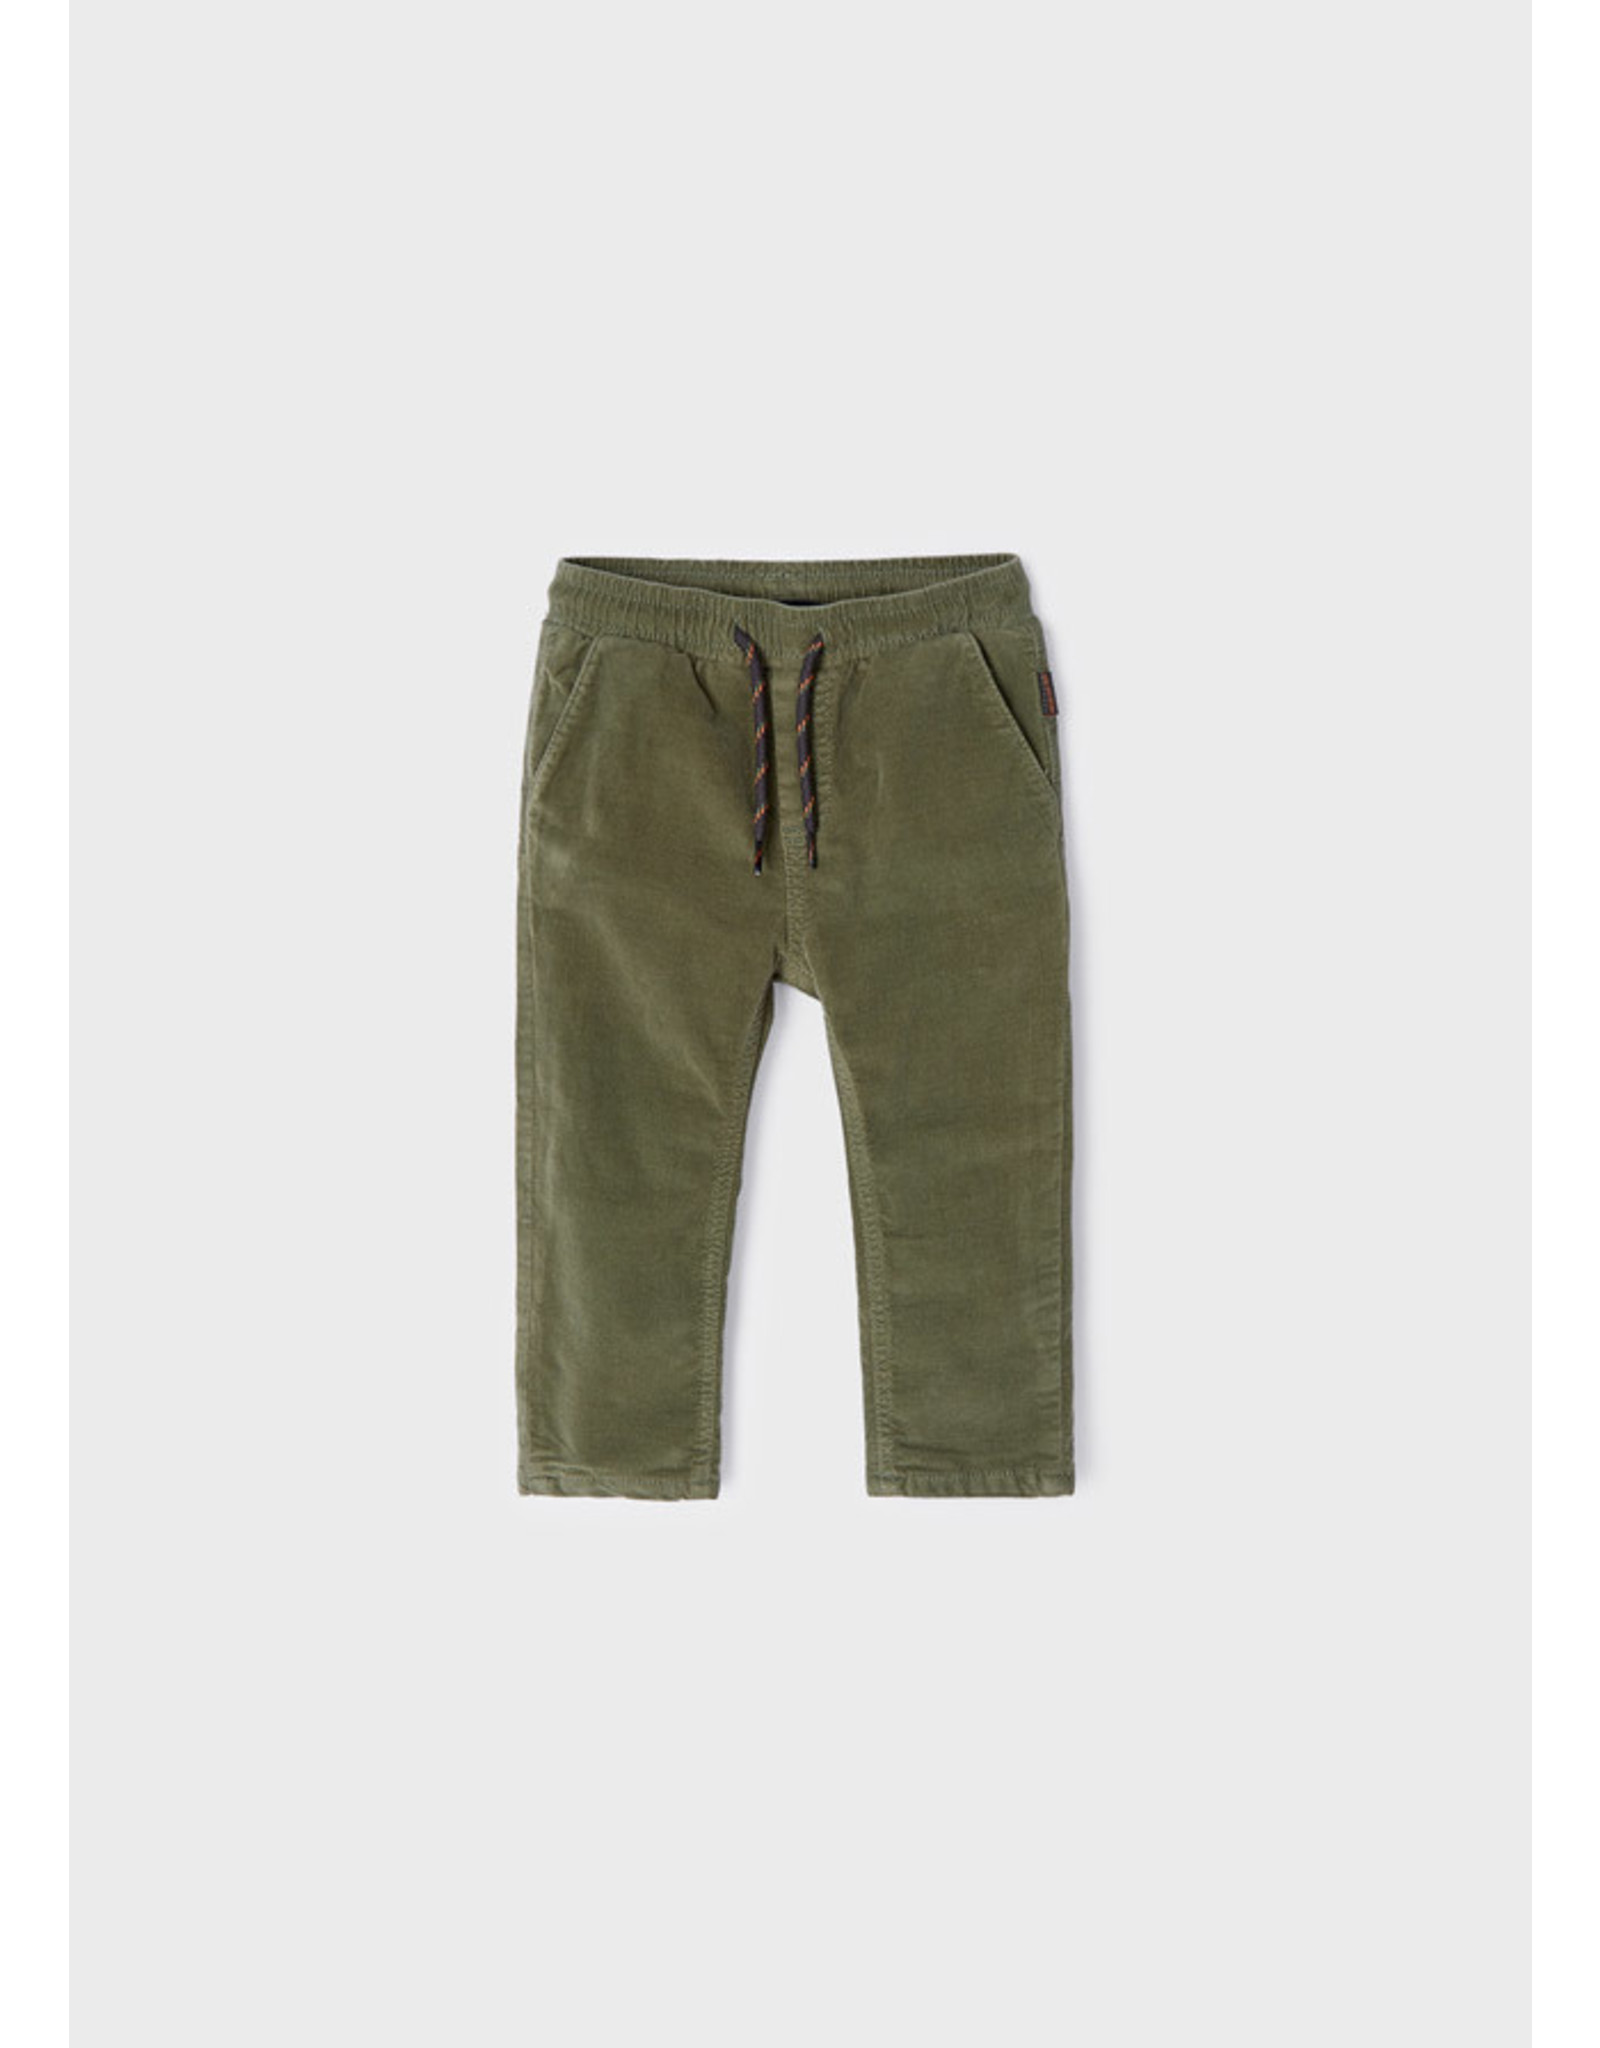 Moss Micro-Cord Lined Trousers